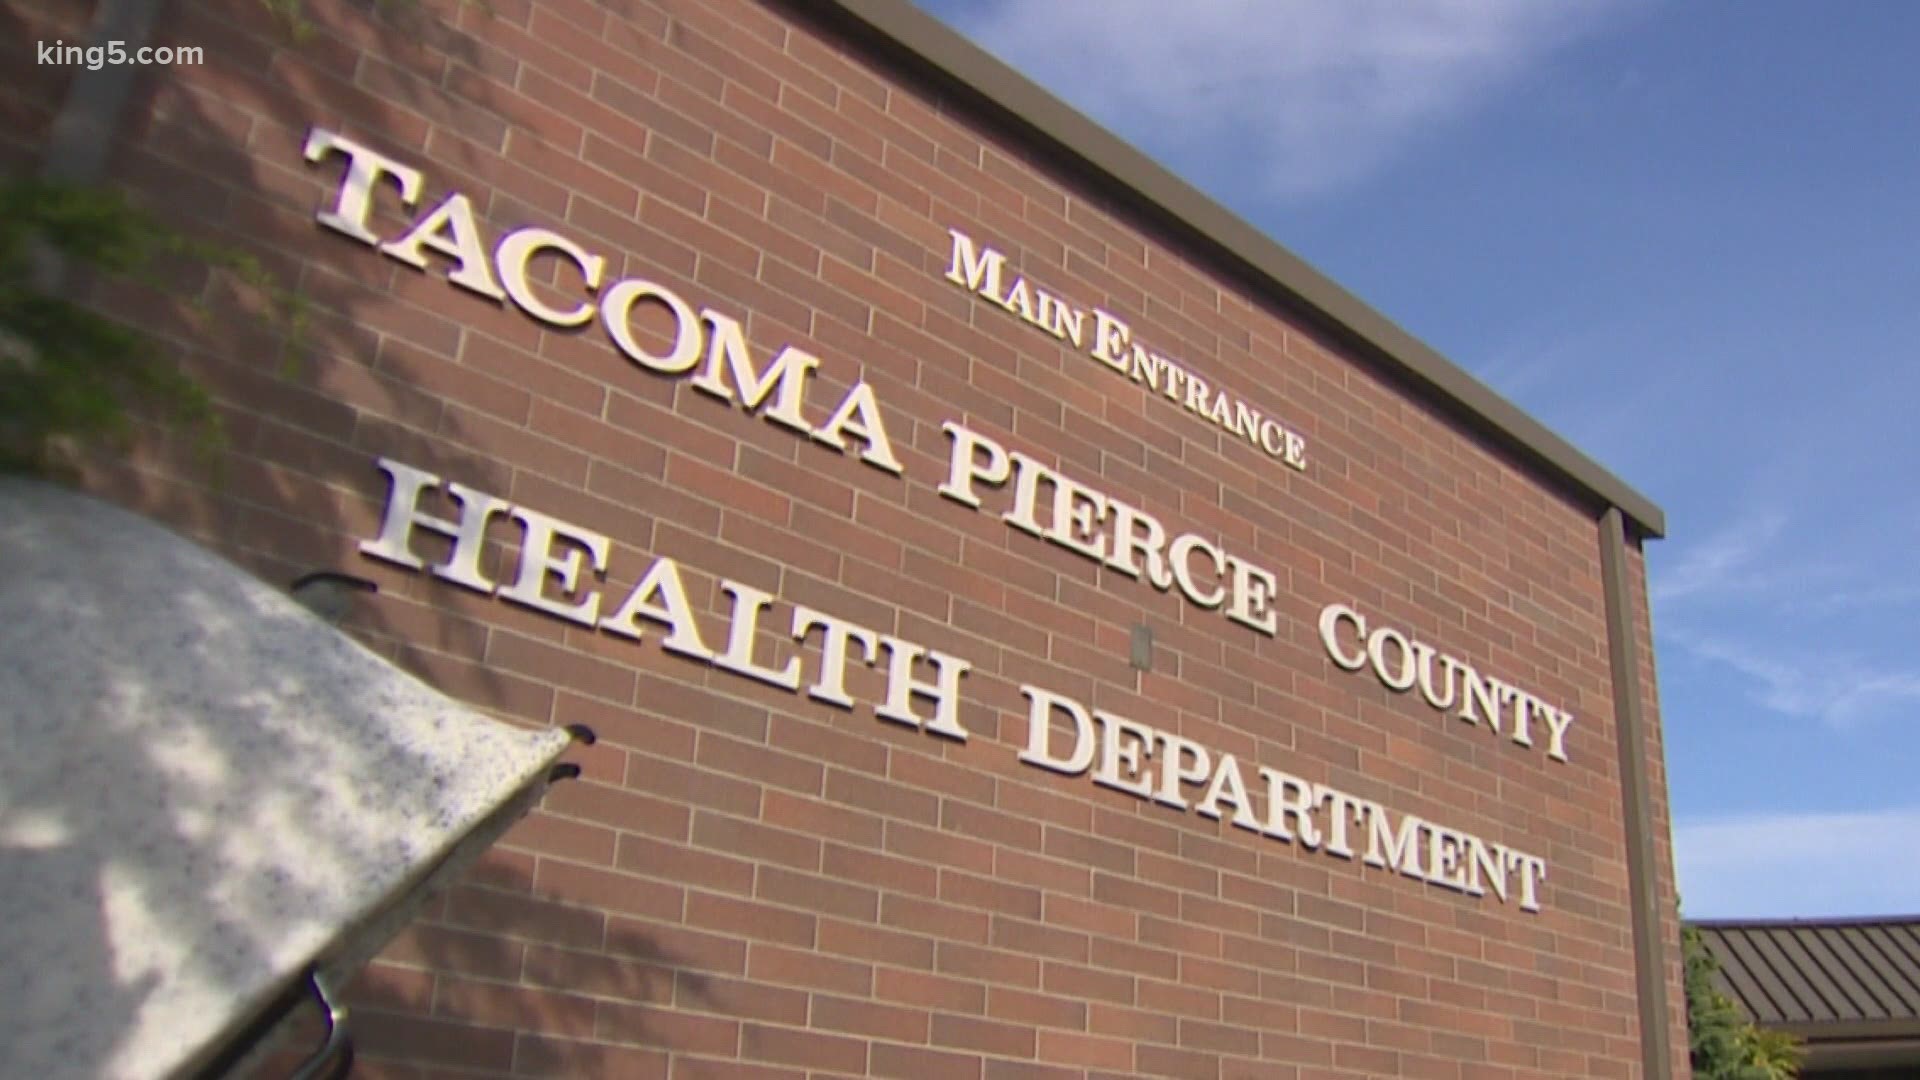 The Pierce County Council has proposed dissolving the 50-year-old agreement to manage the health department with local cities.